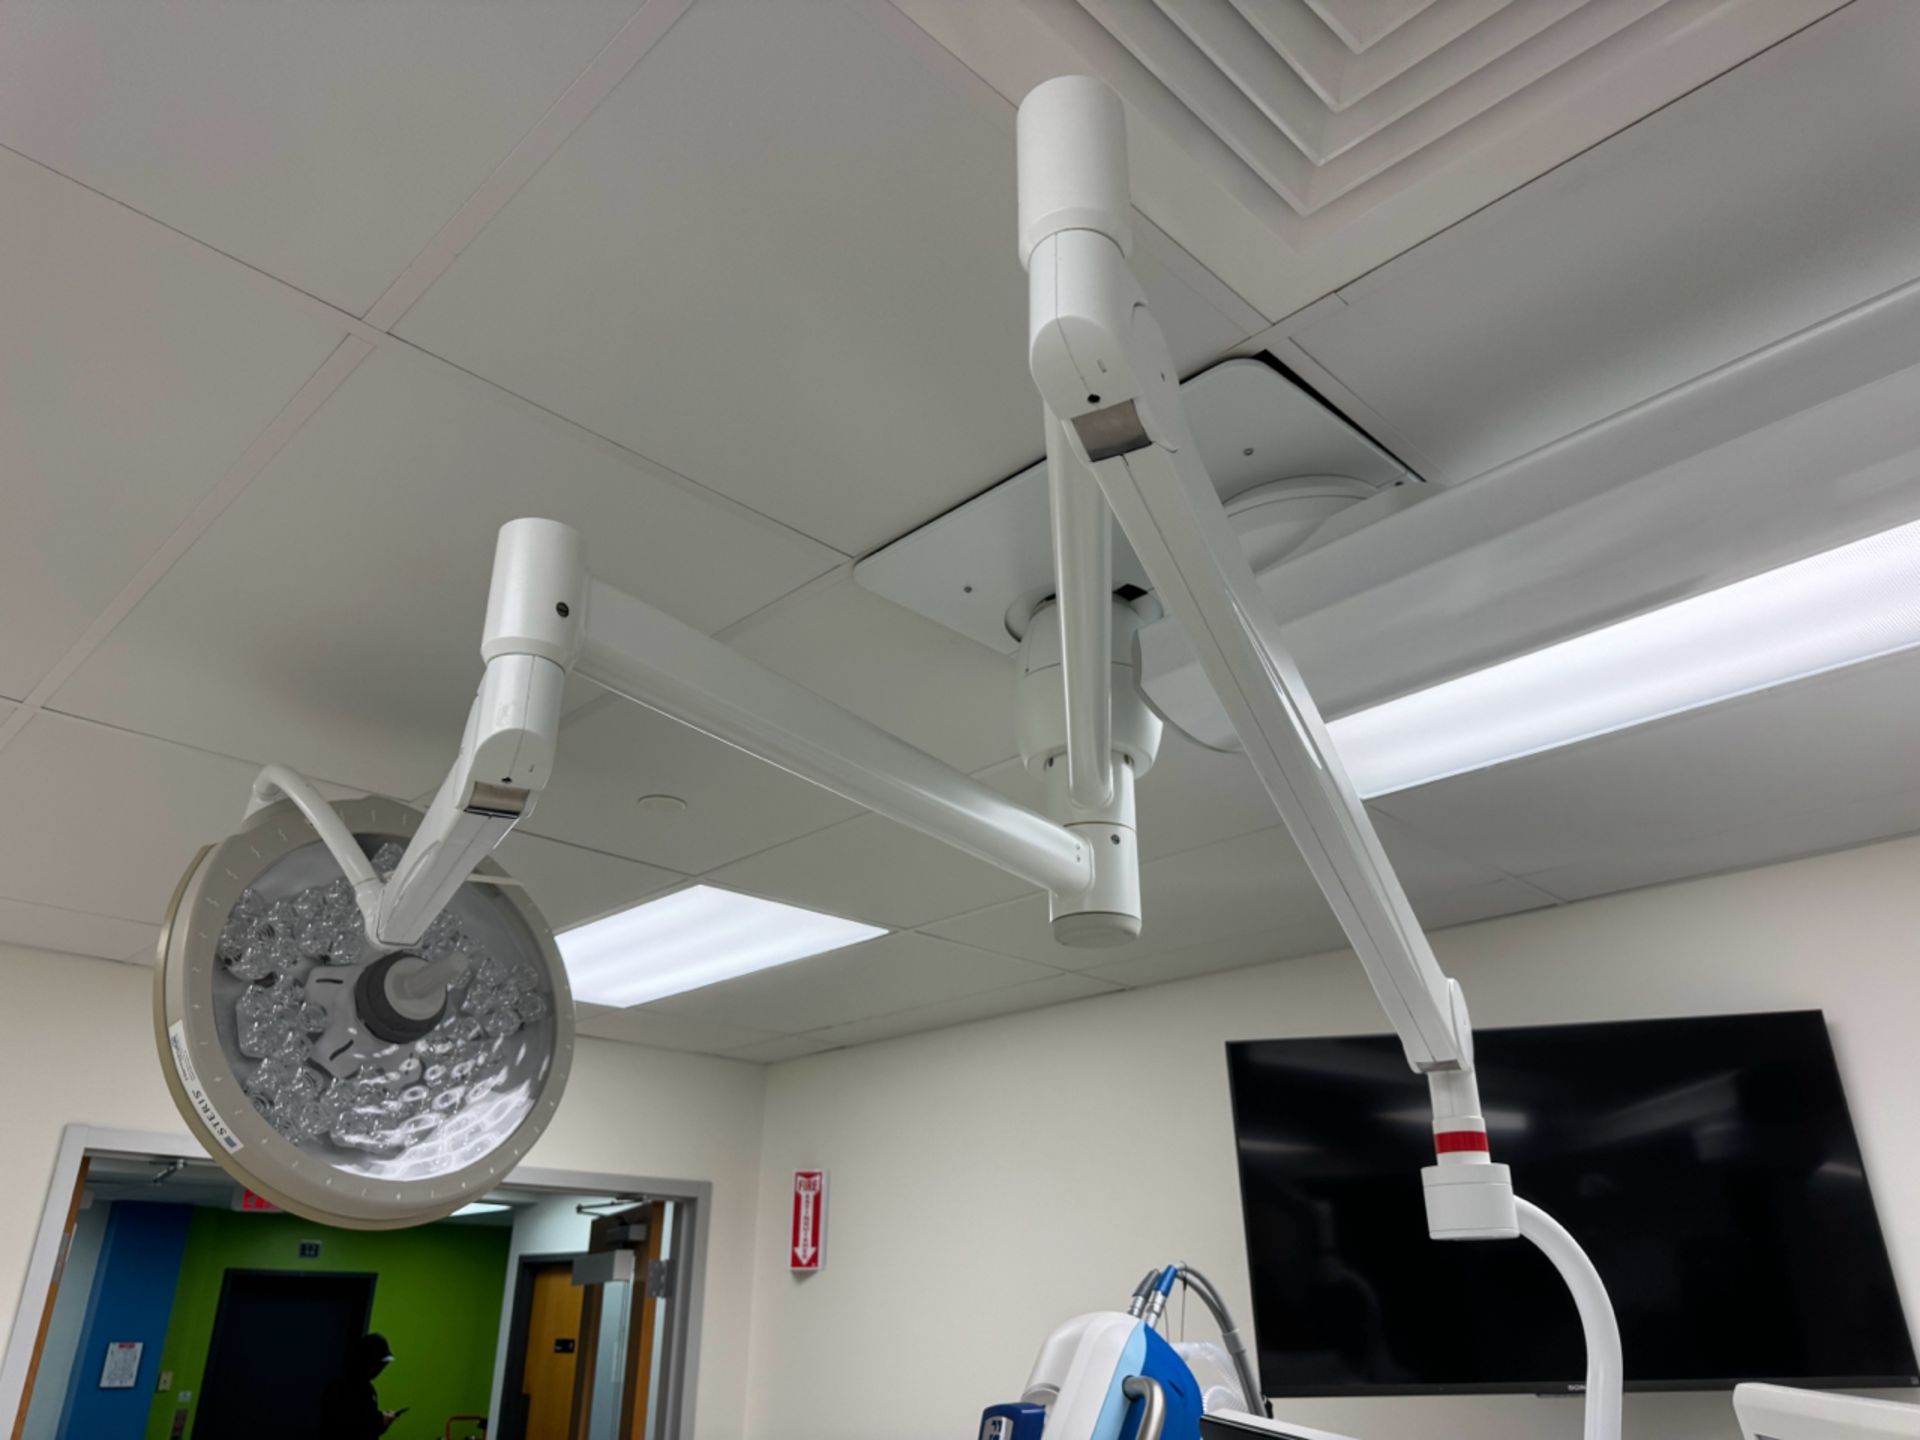 Steris Surgical Lighting System - Image 6 of 7